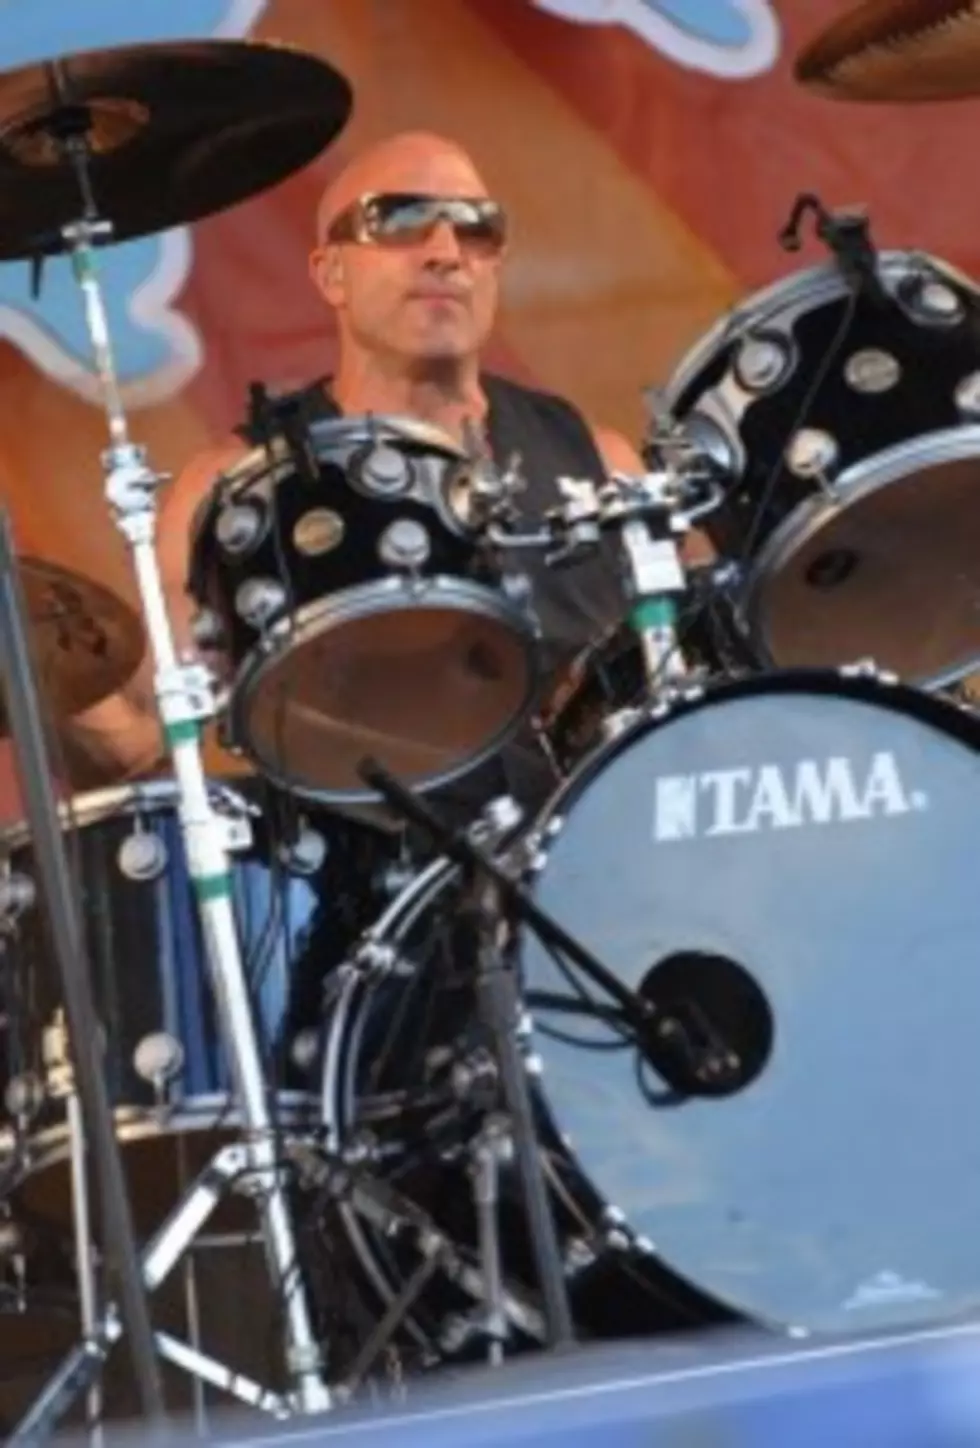 Legendary Rock Drummer Kenny Aronoff Coming to Bozeman for a Drum Clinic Tomorrow